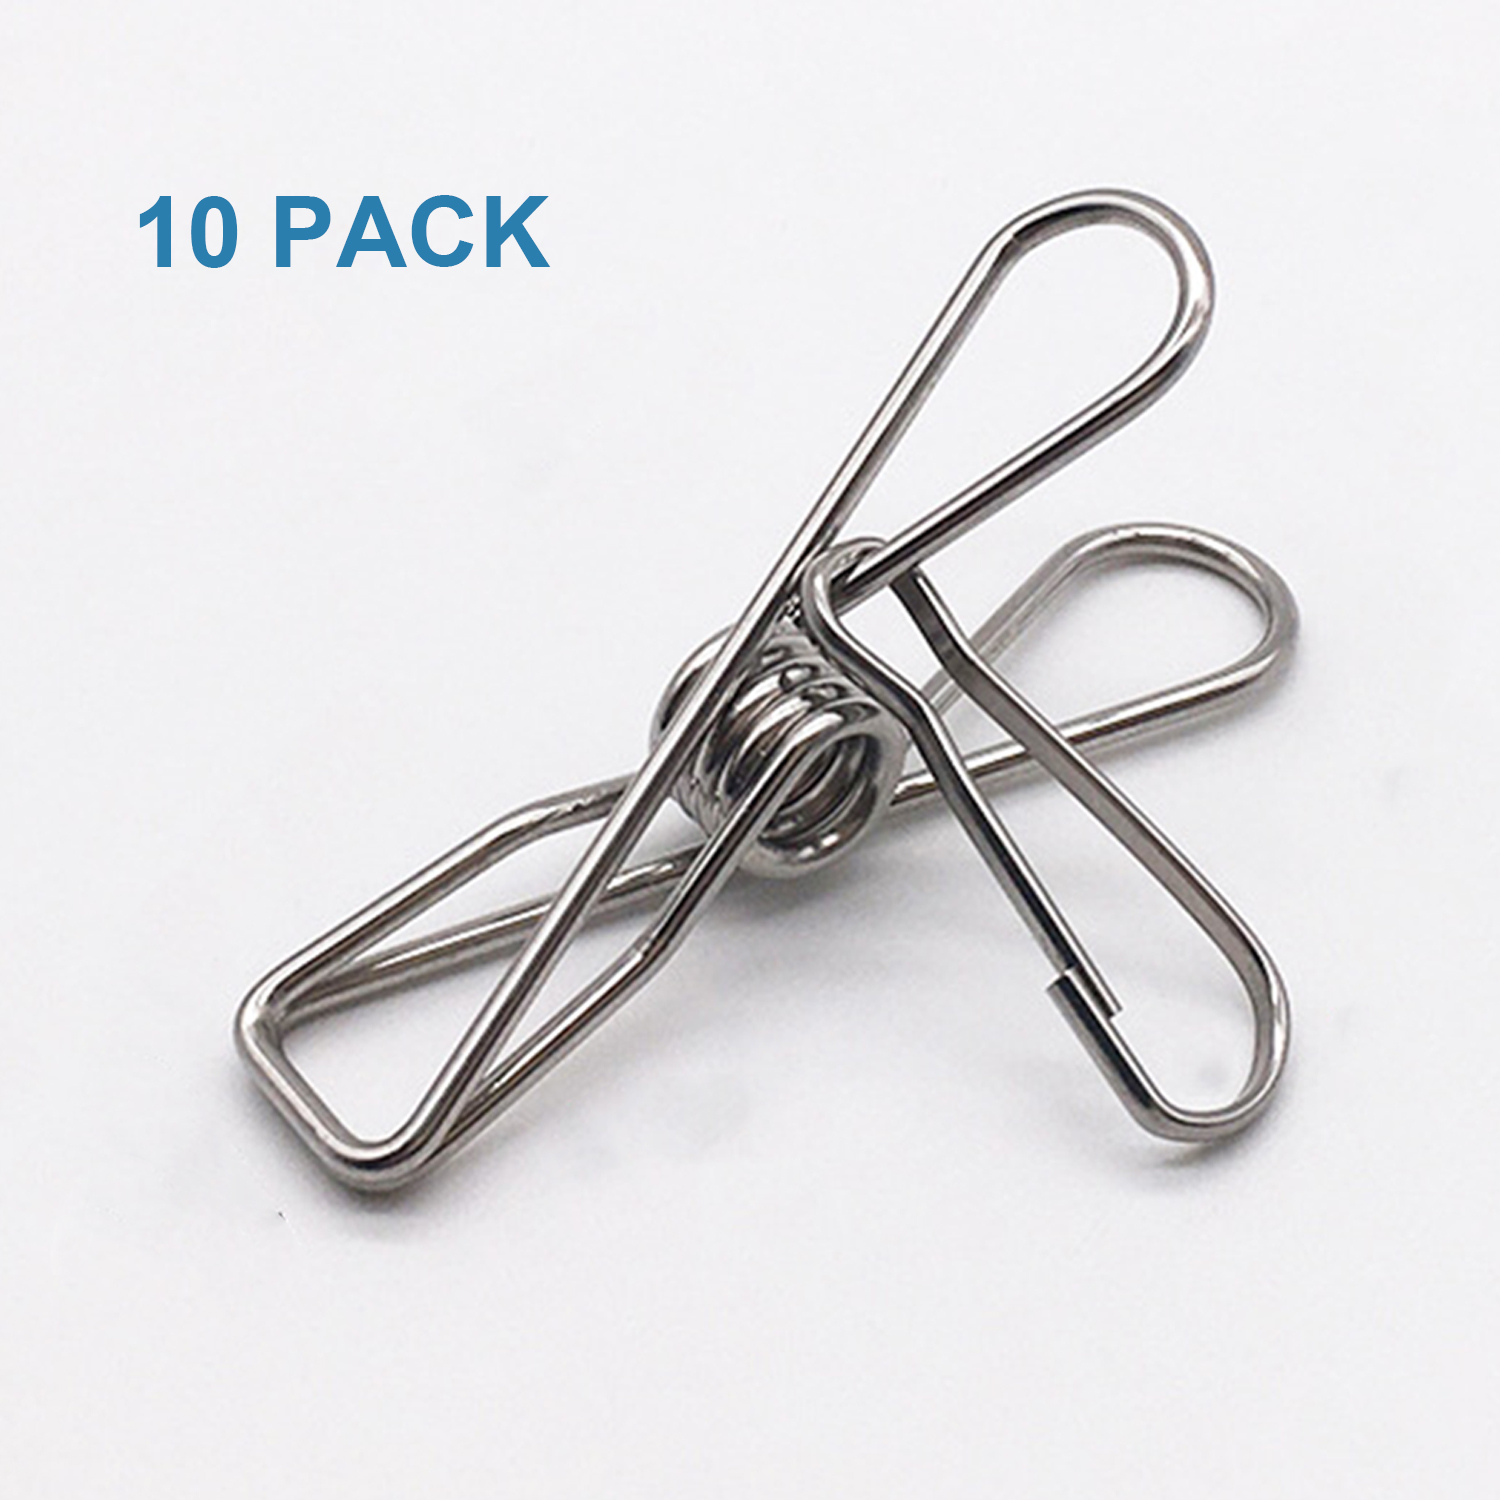 8 Pcs Stainless Steel Clothes Clothes Pin Stainless Steel